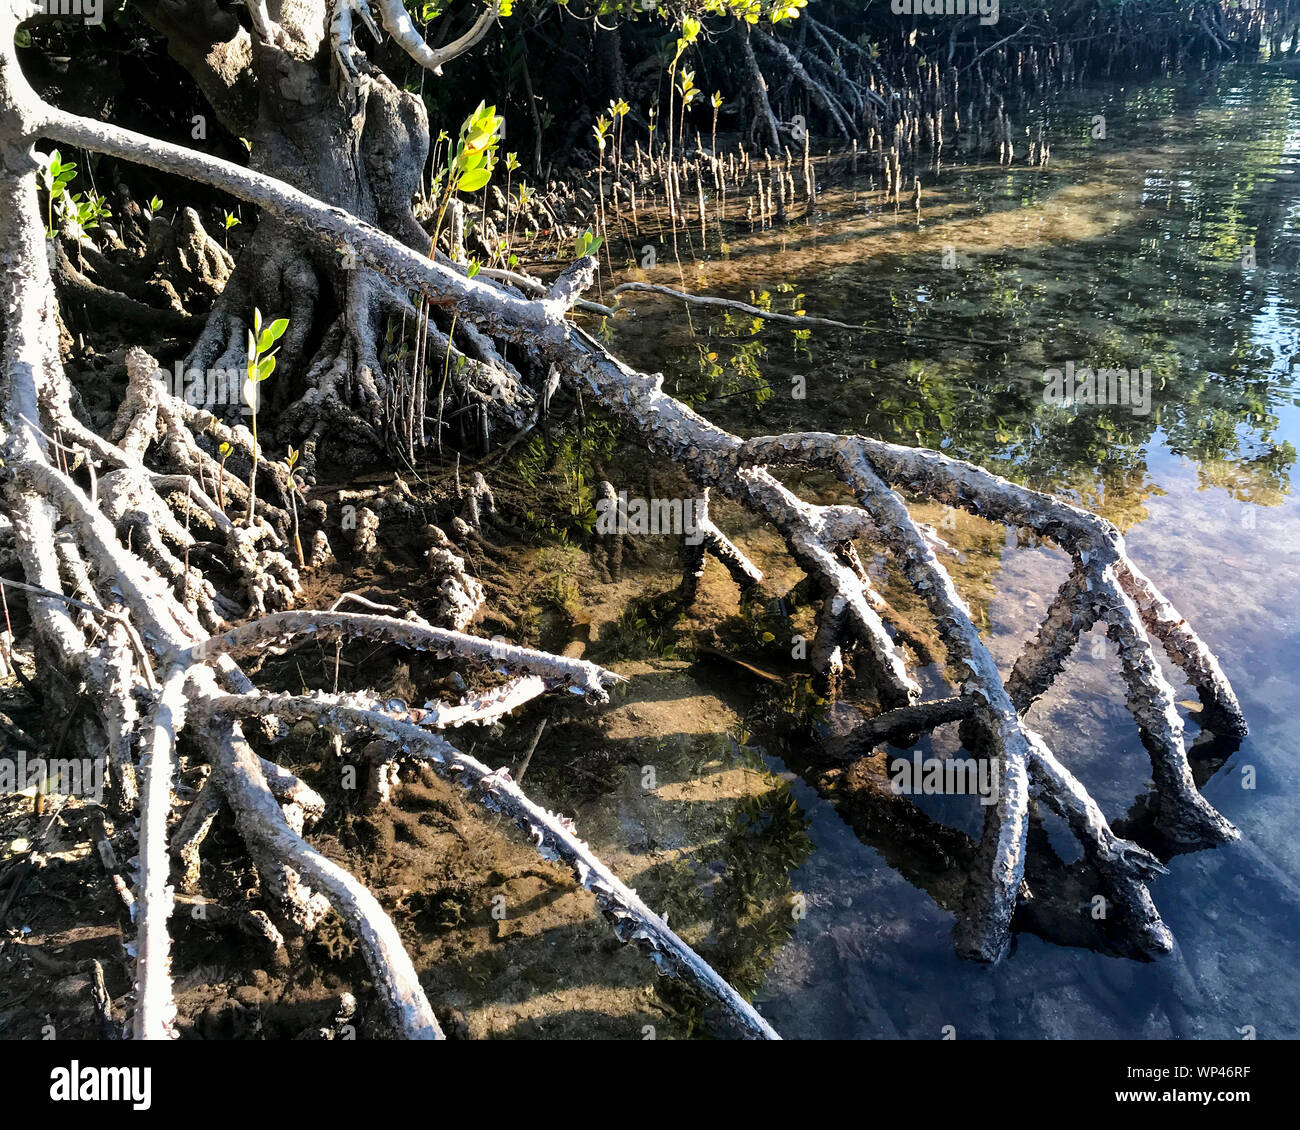 Mangrove Rhizophora prop roots and Avicennia pneumatophores in a forest in south Madagascar Stock Photo